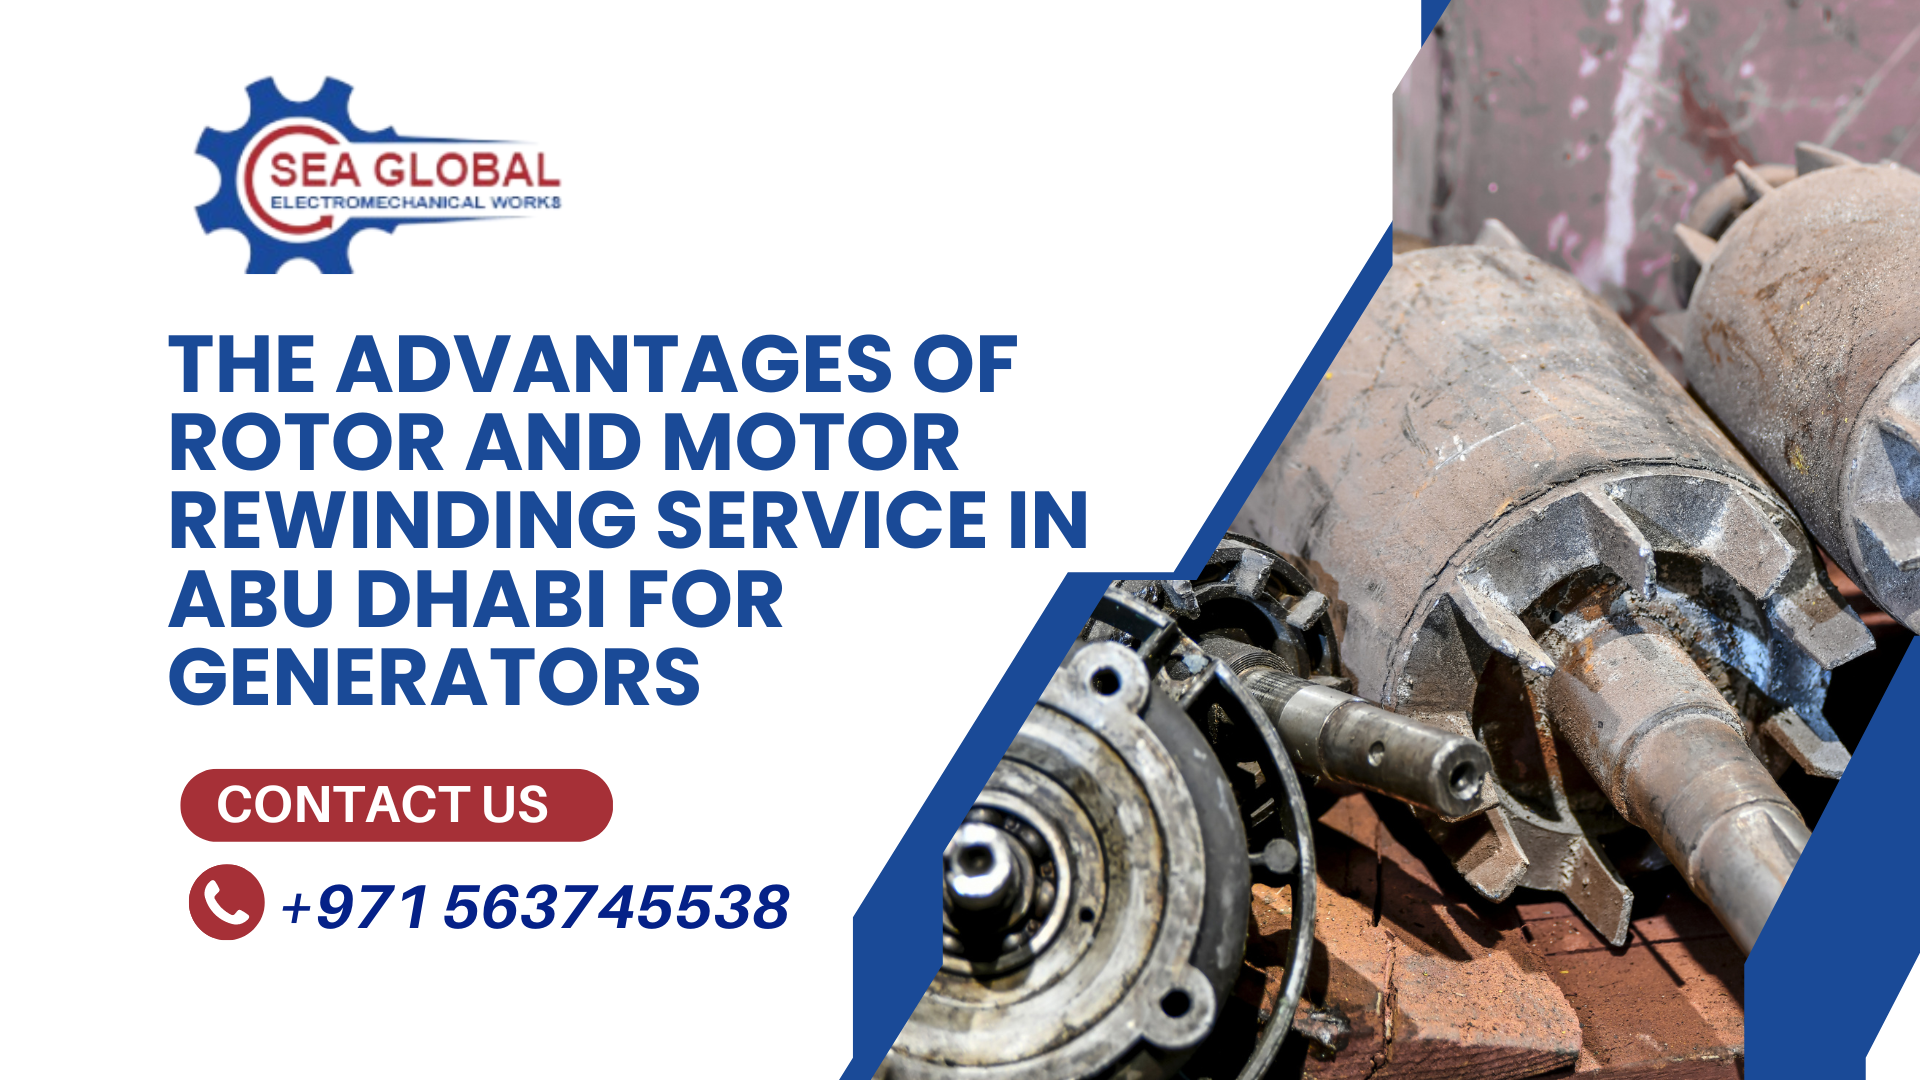 The Advantages of Rotor and Motor Rewinding Service in Abu Dhabi for Generators